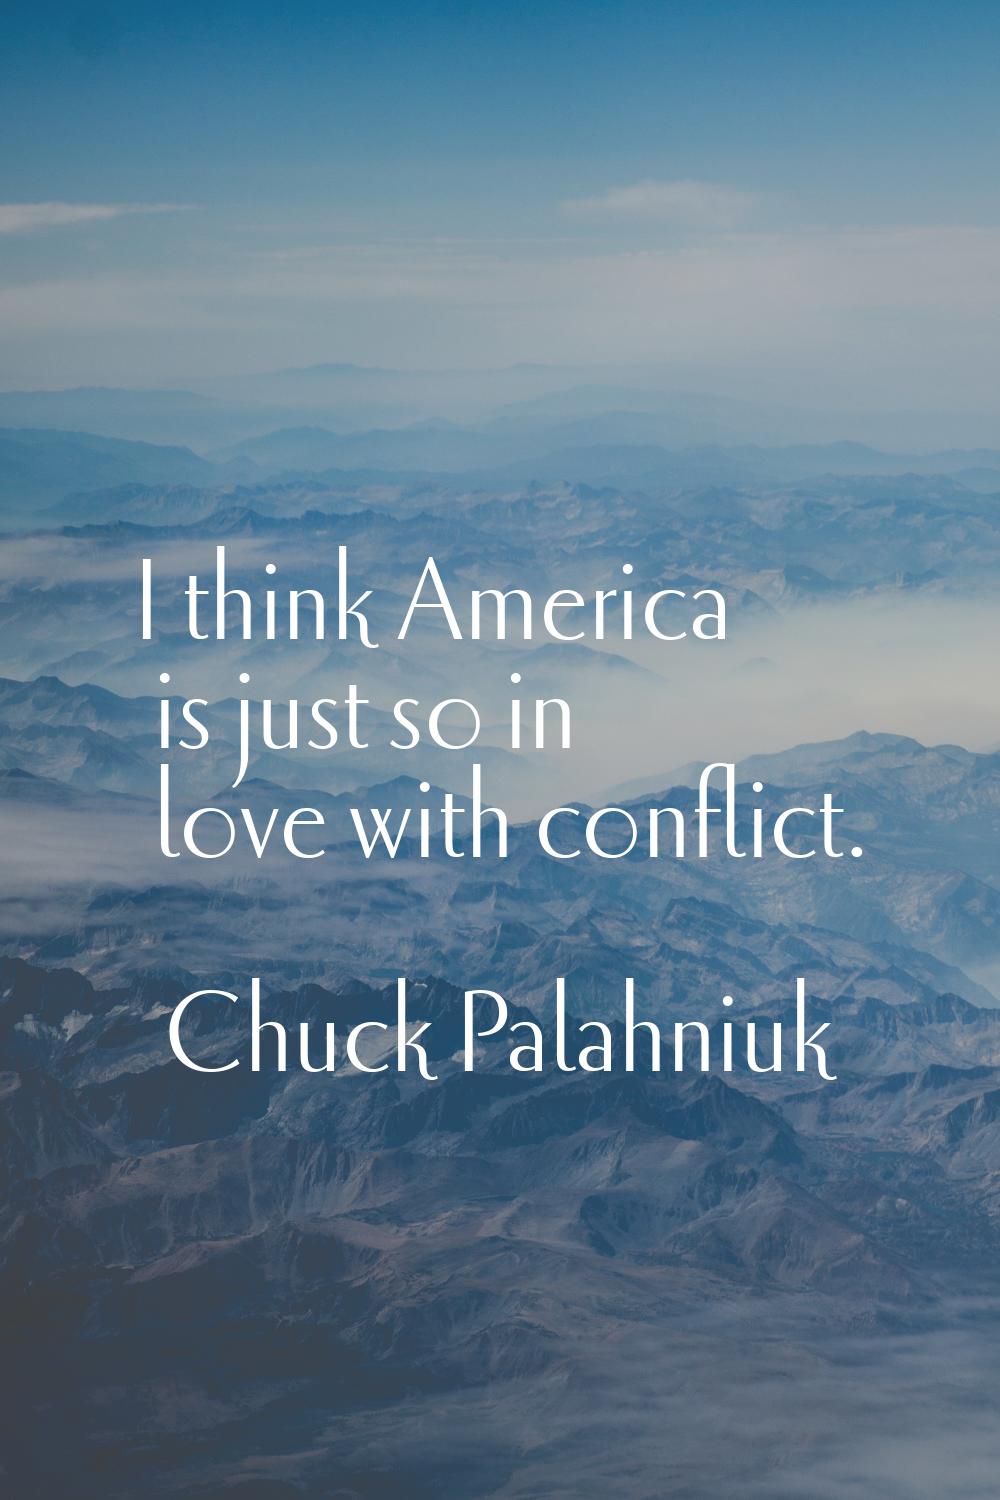 I think America is just so in love with conflict.